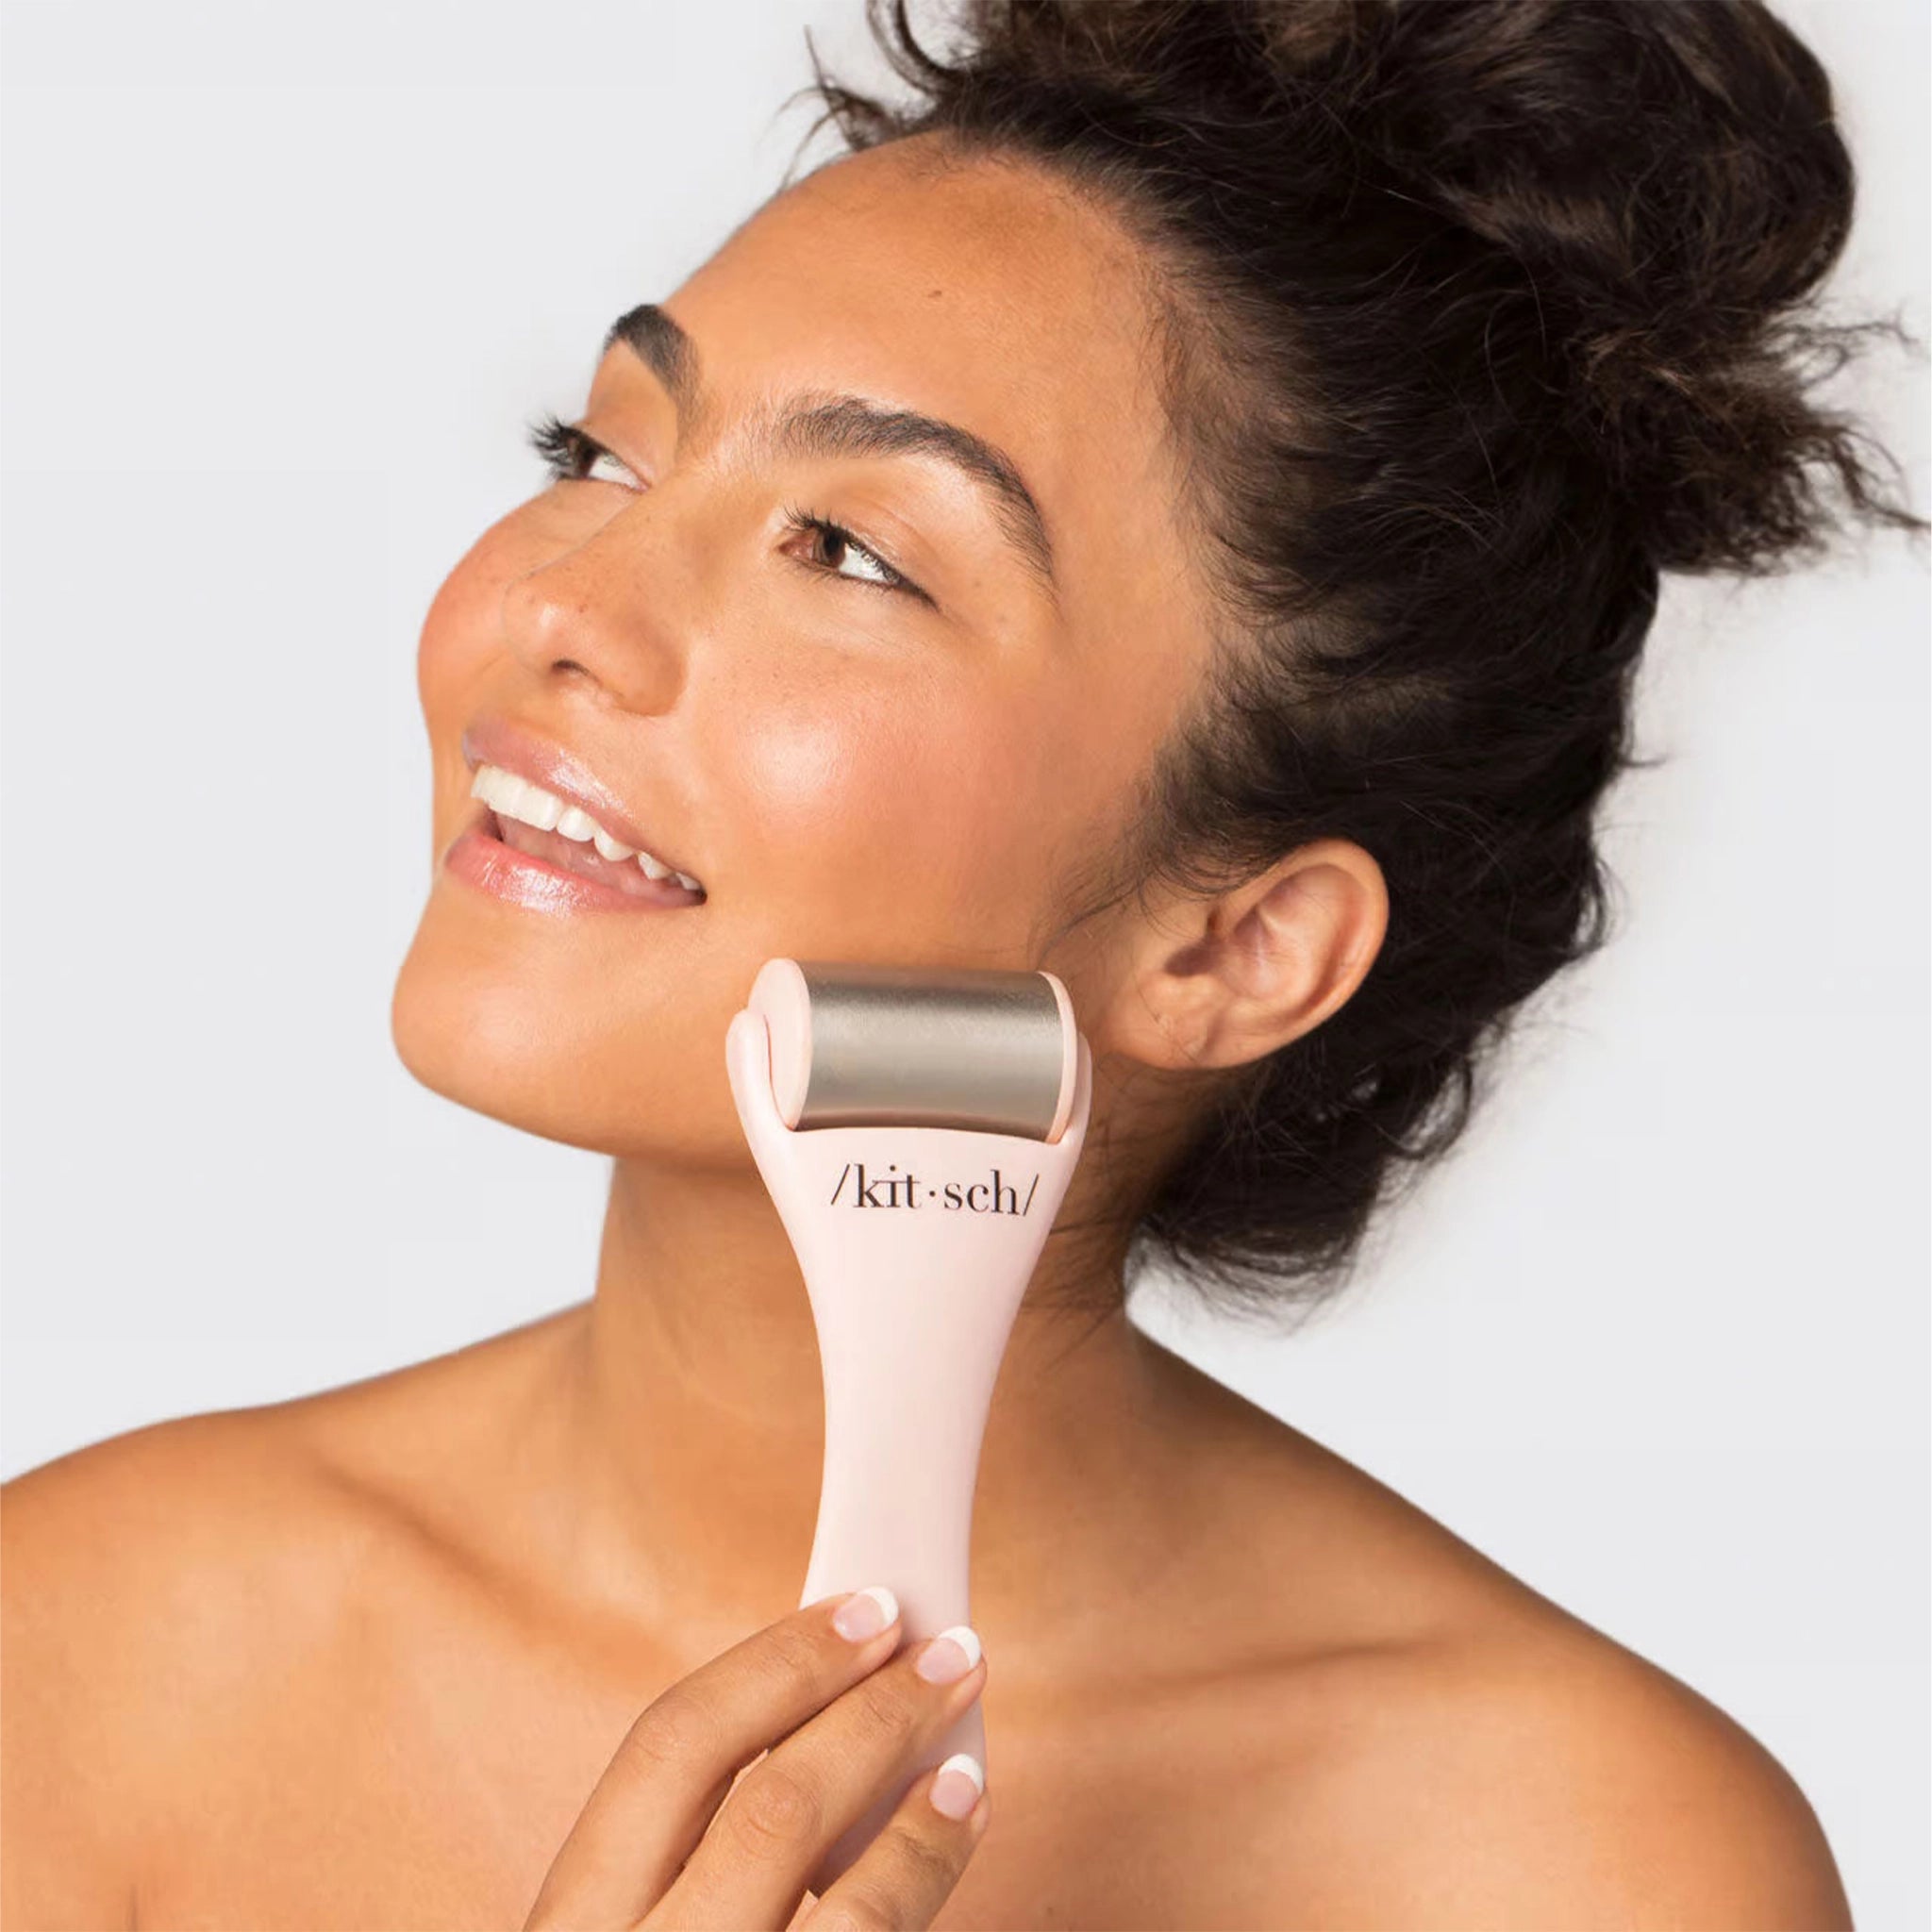 On a white background is a model holding a light pink and stainless steel facial ice roller.